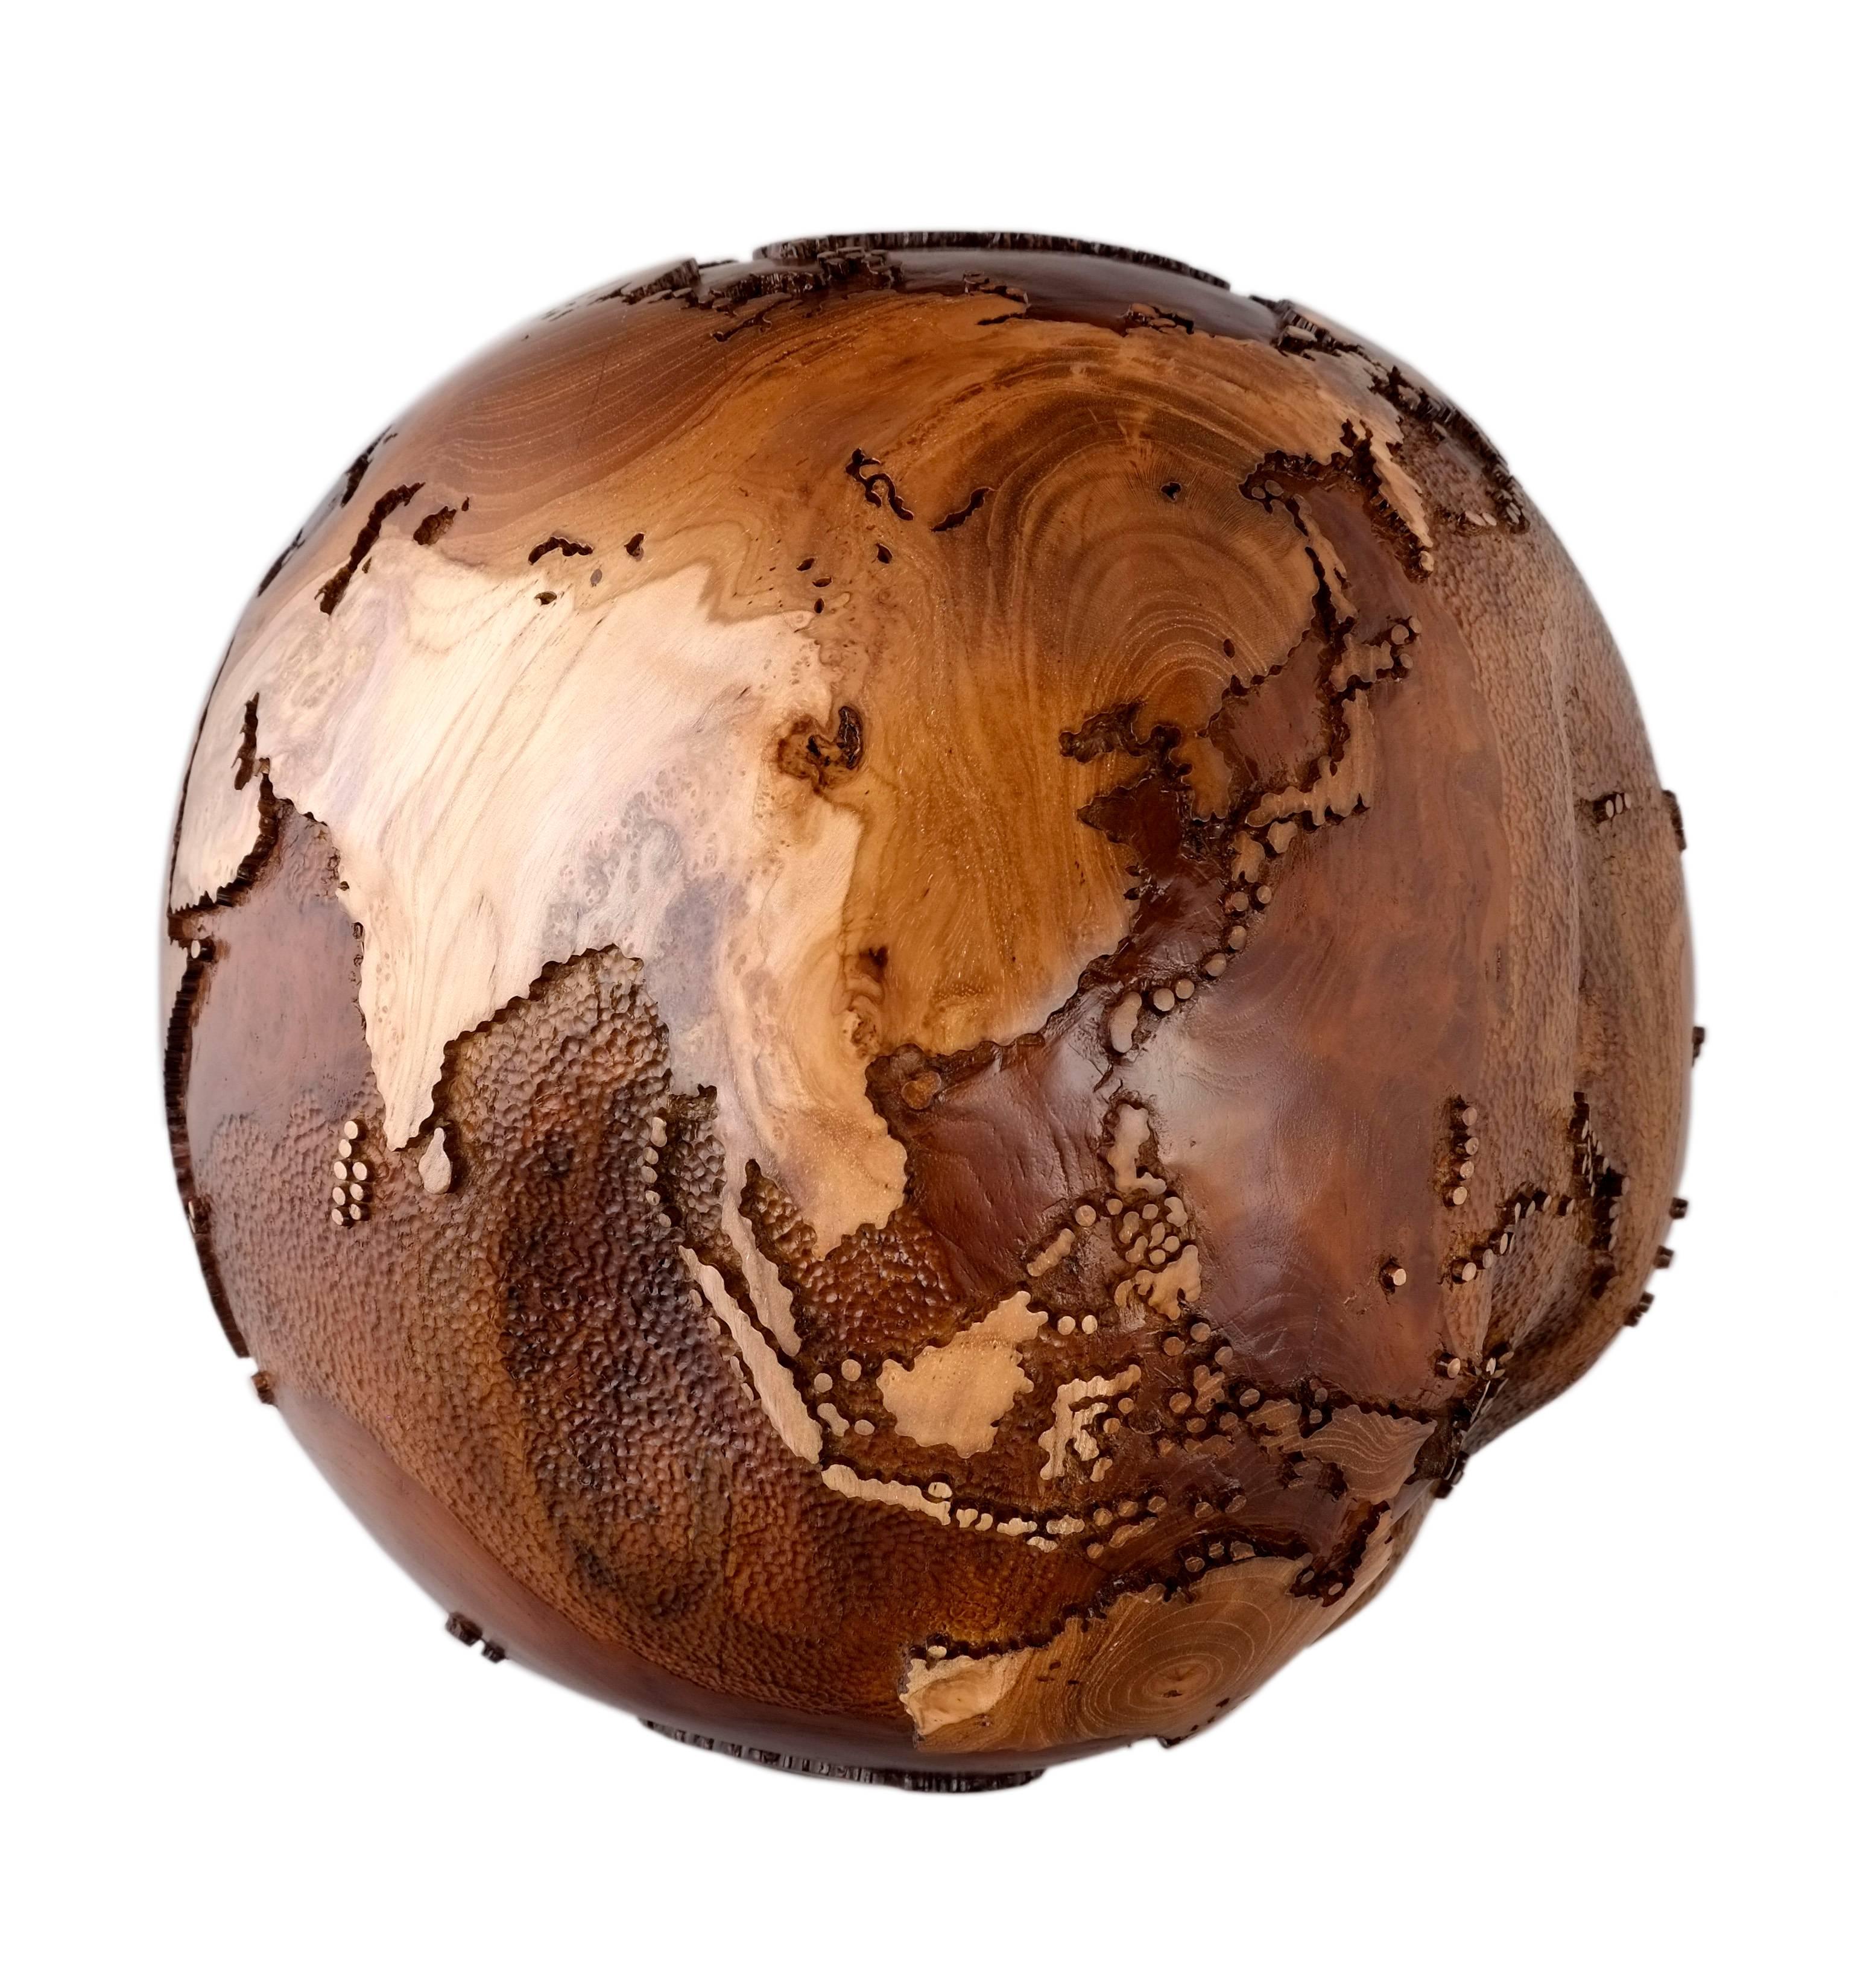 Organic Modern Contemporary Eclat Vibe Globe in Natural Burl and Hammered Skin Textured, 30cm For Sale